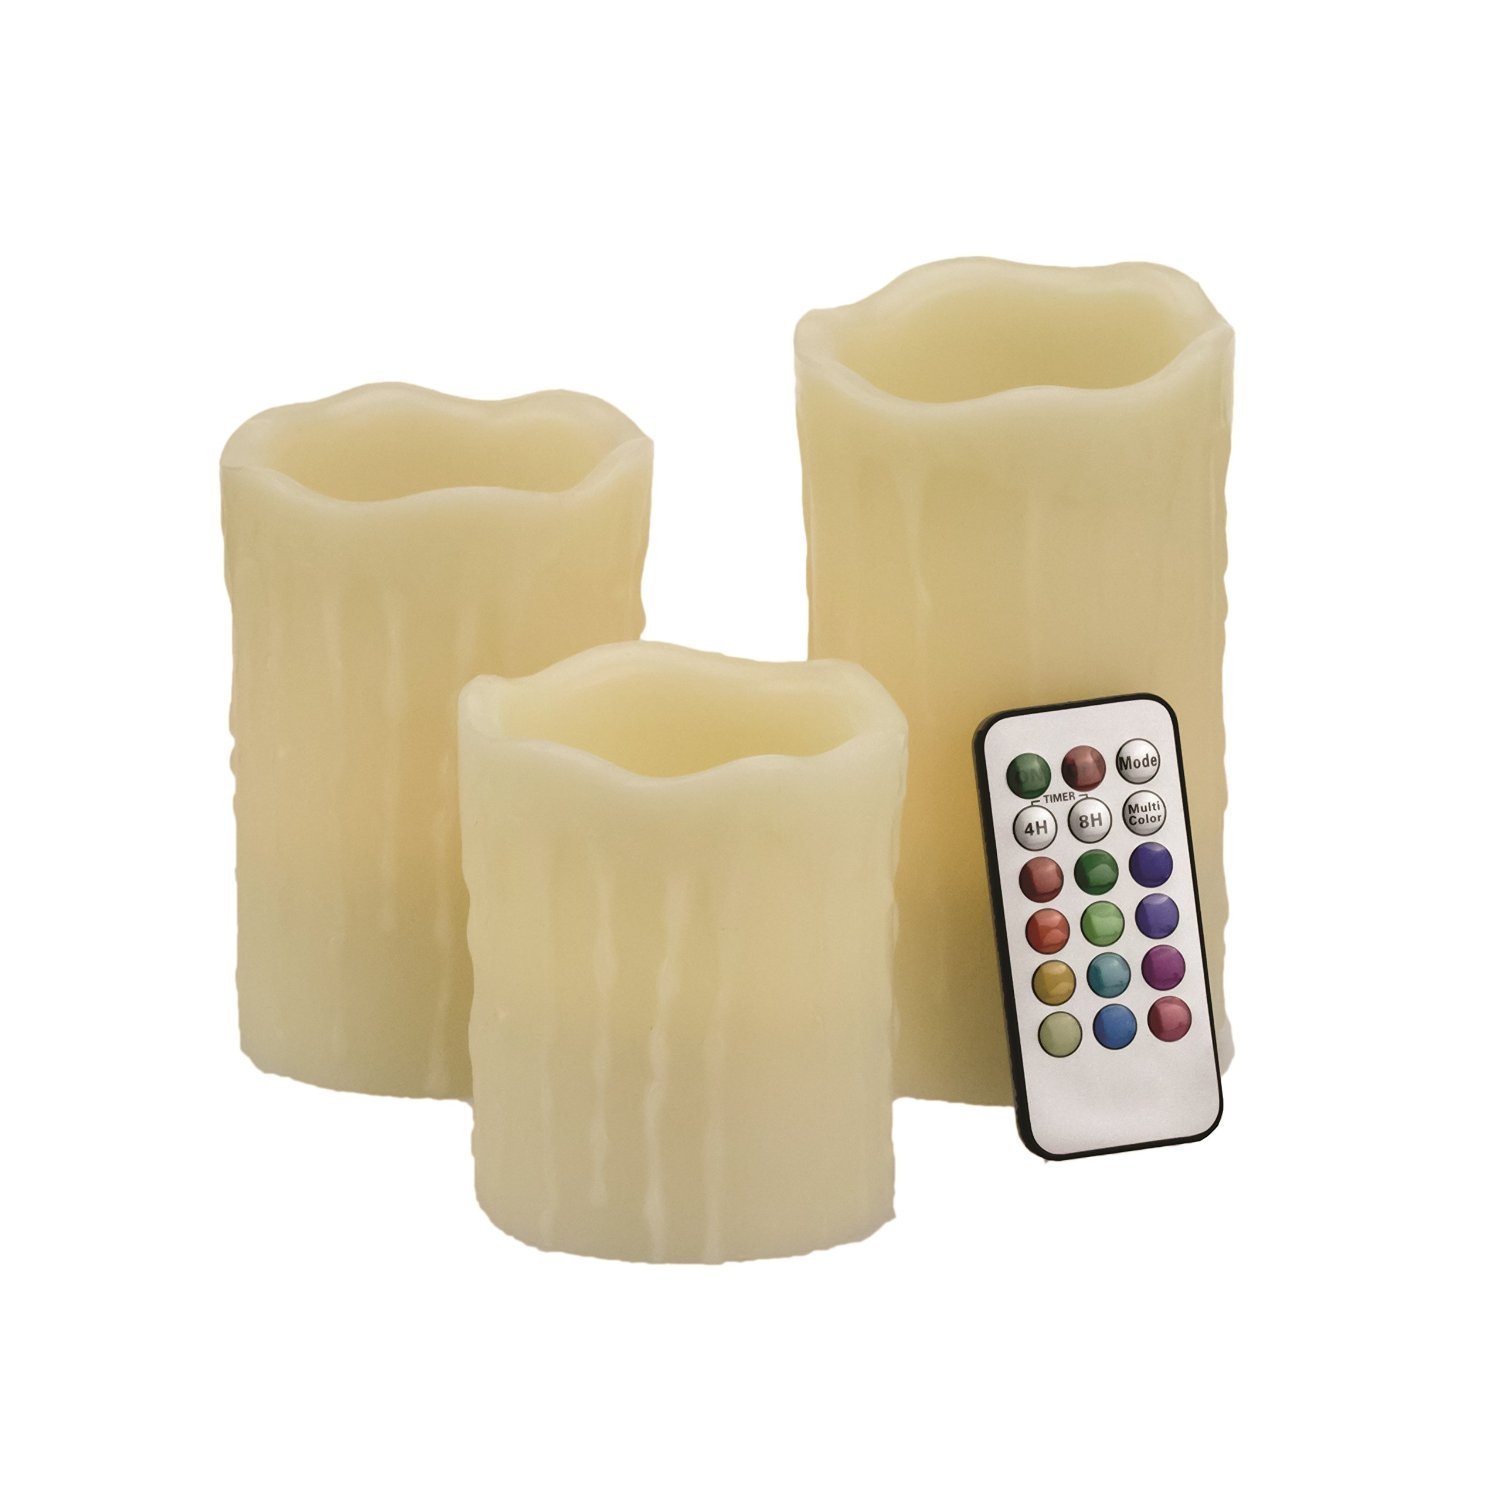 2-Tone Melted Wax Candle Set w/Remote Control